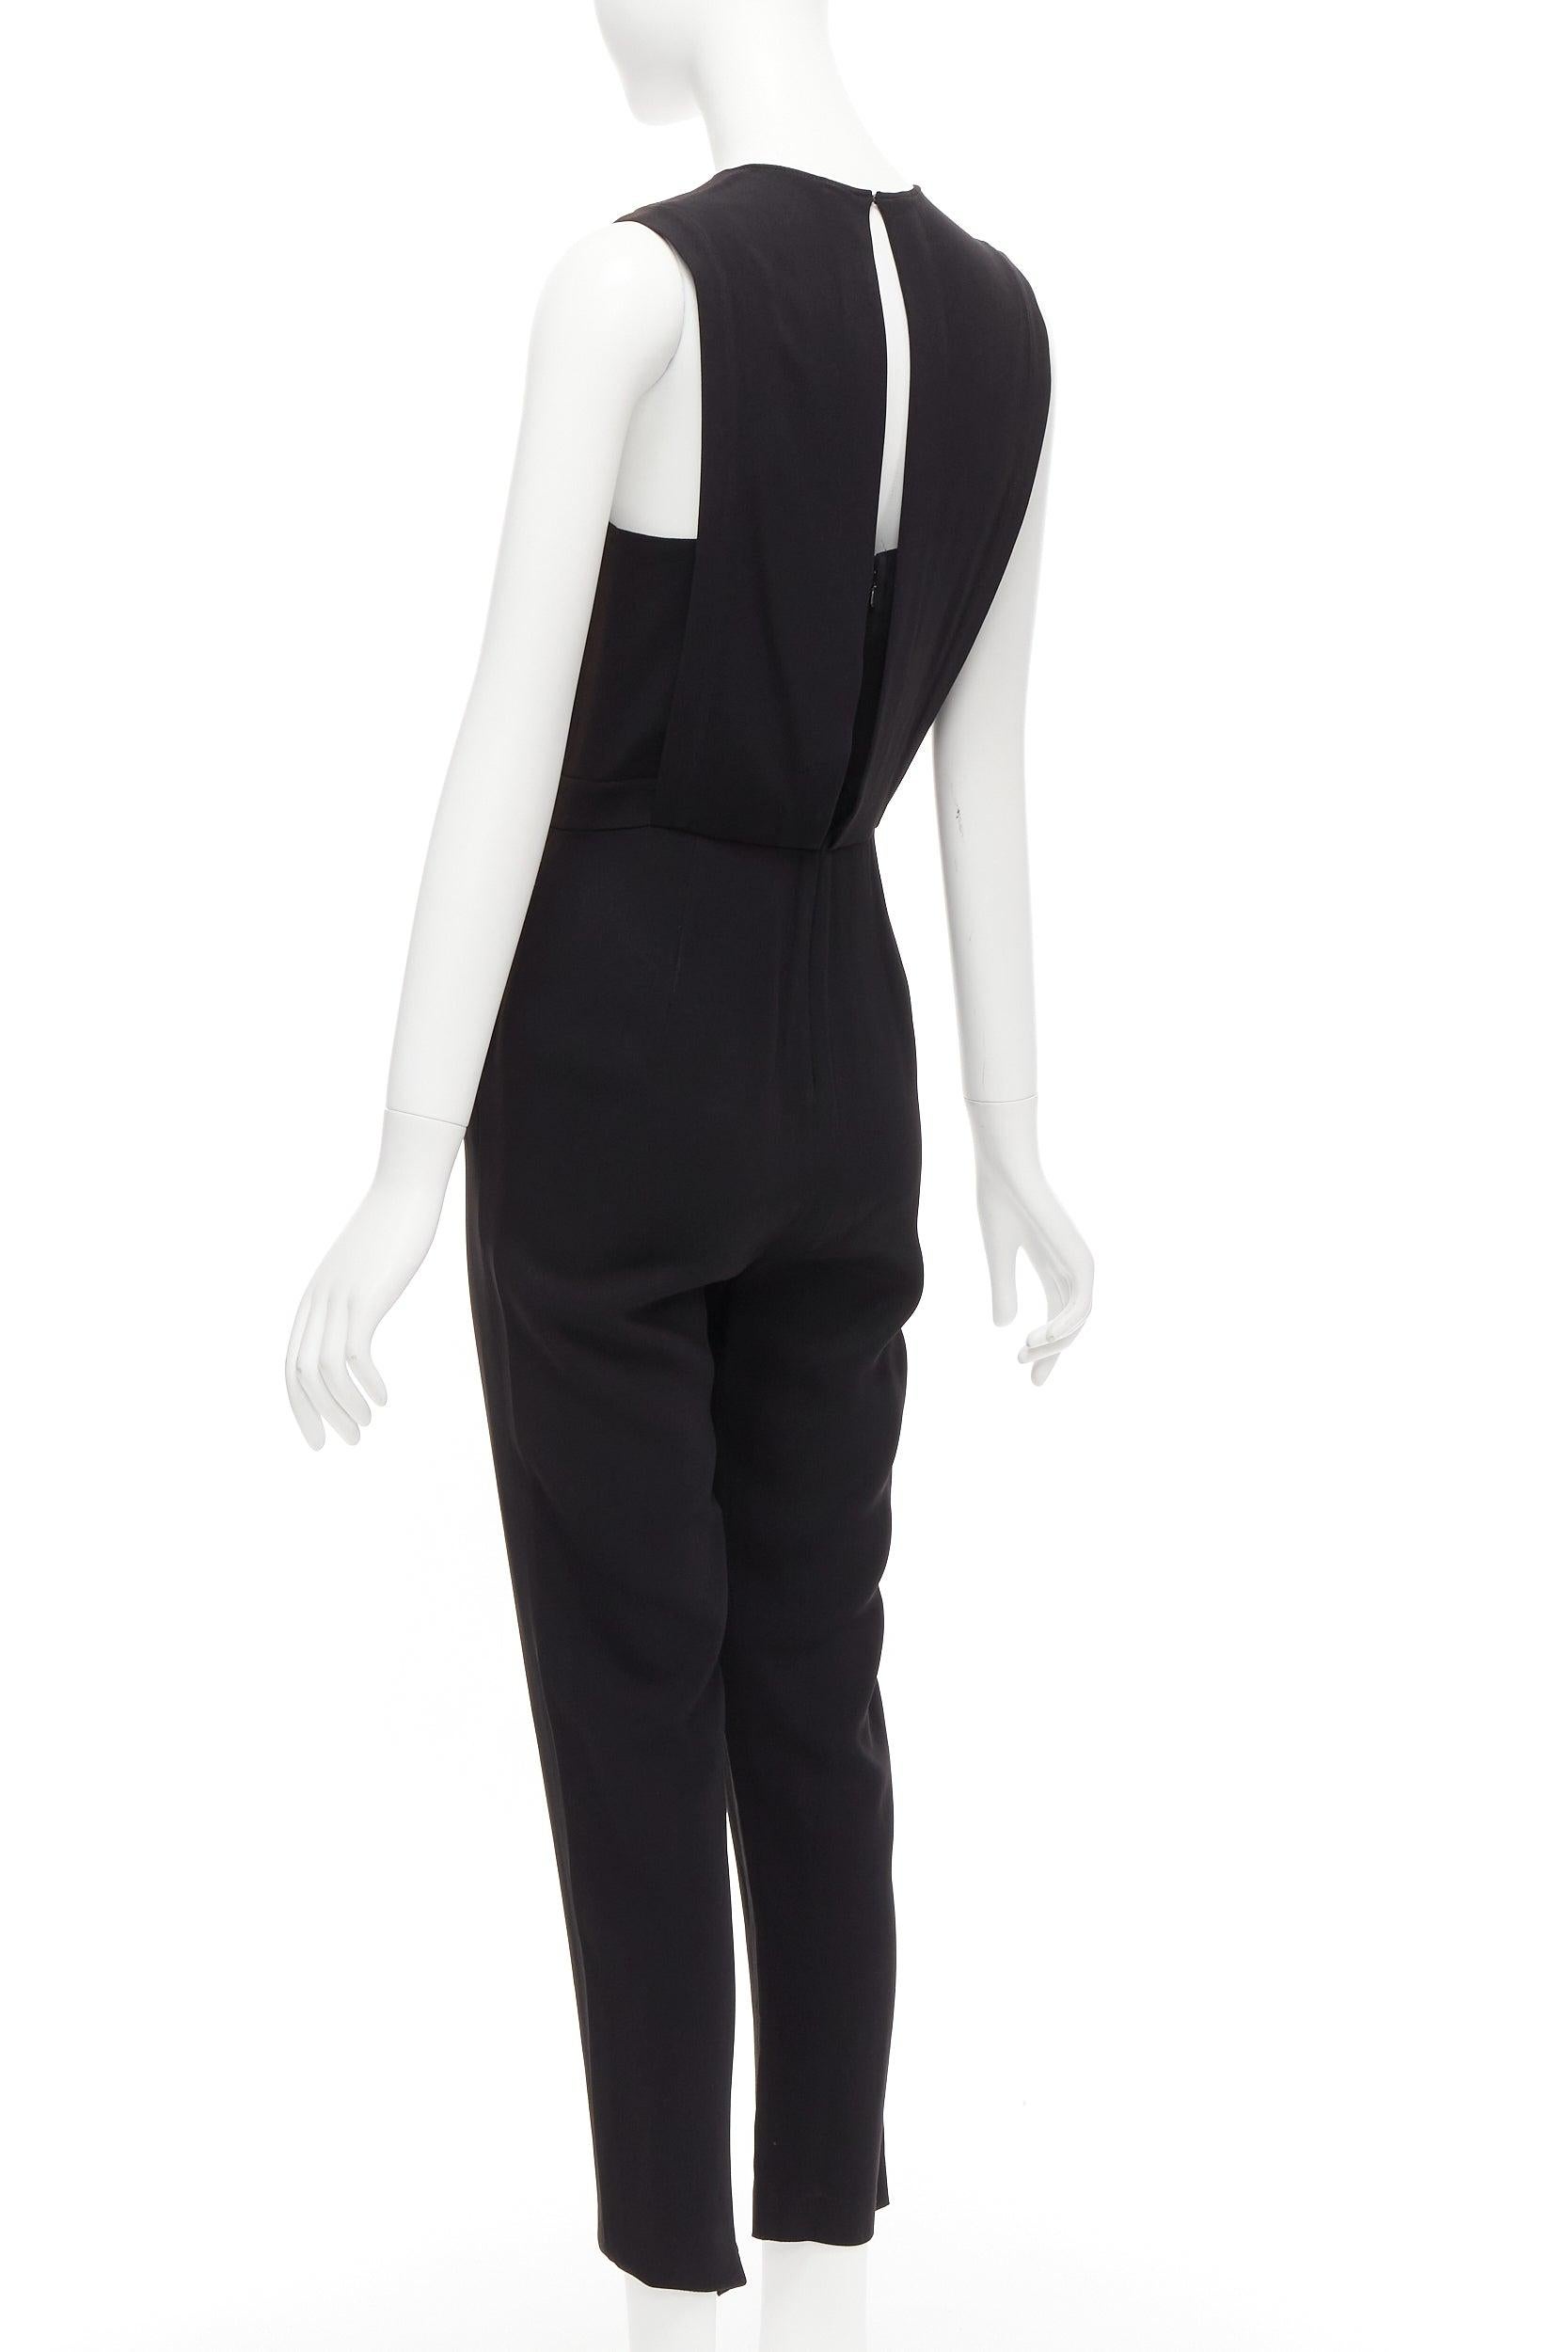 THEORY black layered top back zip cropped sleeveless jumpsuit US0 XS For Sale 1